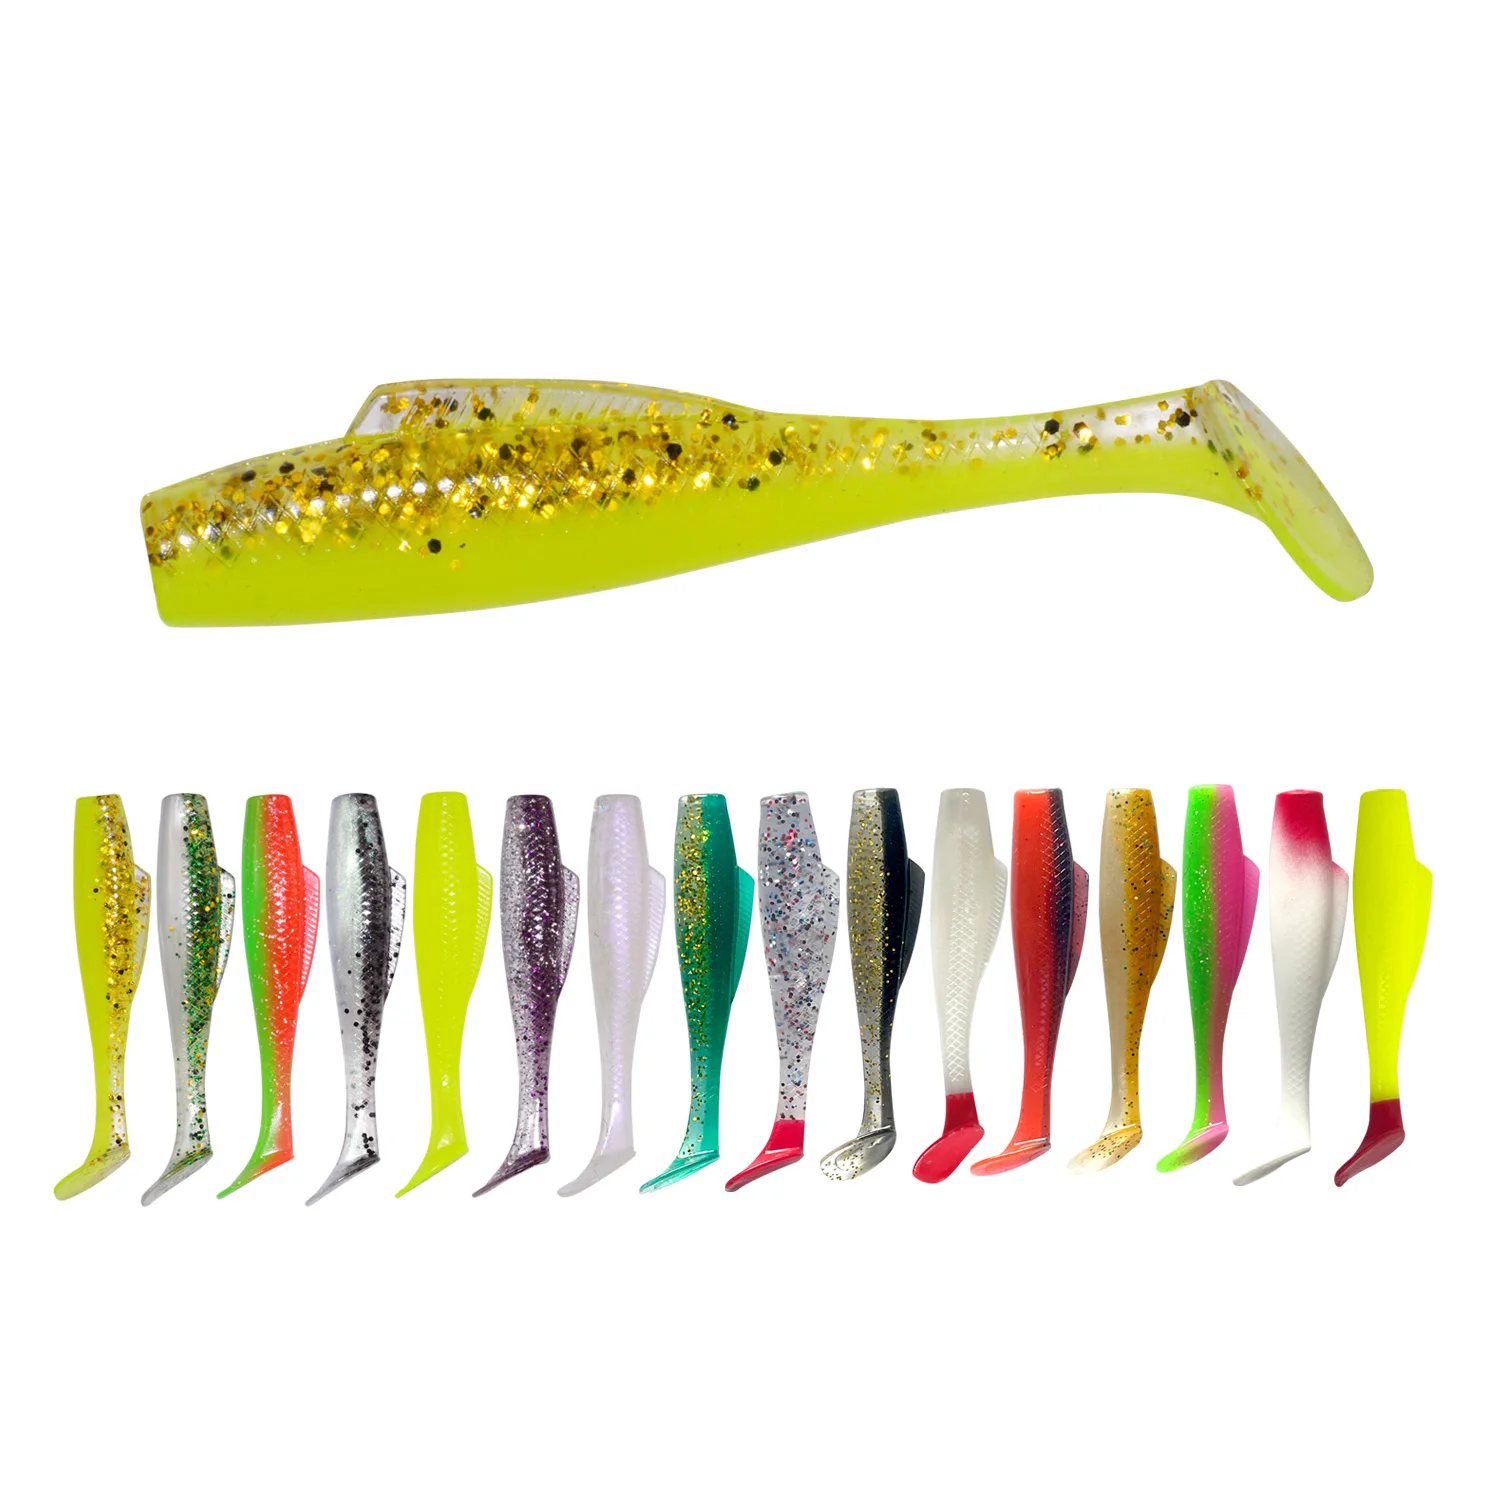 

Artificial soft Lures Fishing Worm Silicone Bass Pike 85mm 5g 6pcs Minnow Swimbait Jigging Plastic Baits